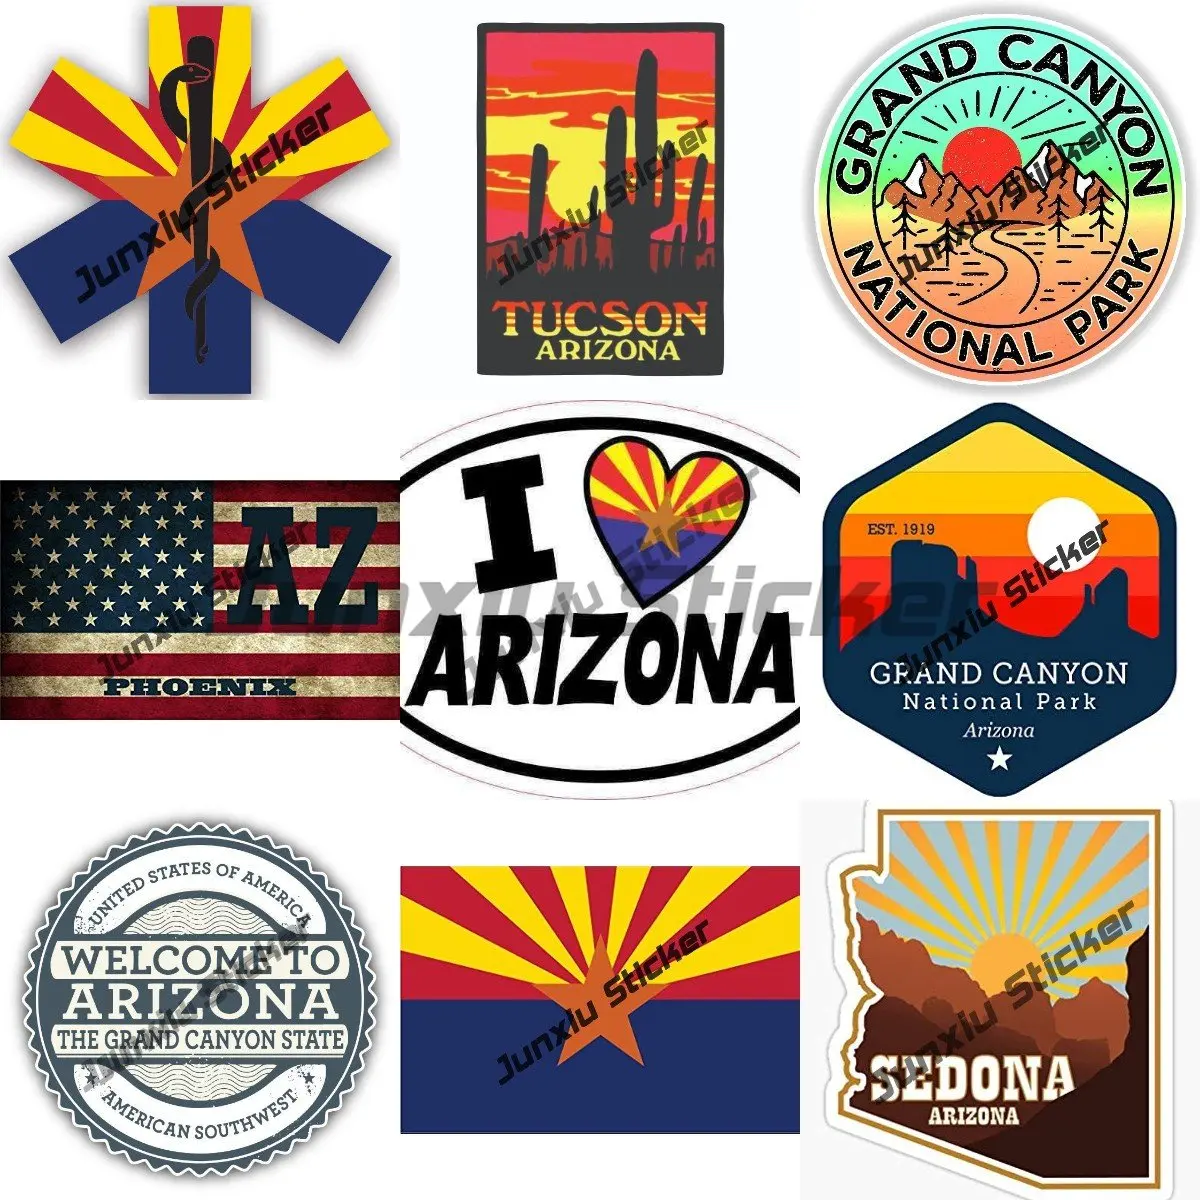 

Arizona State USA Travel Stamp Sticker Arizona Star of Life Flag Ems Emt Emergency Sticker Accessories for Cars Suv Camping